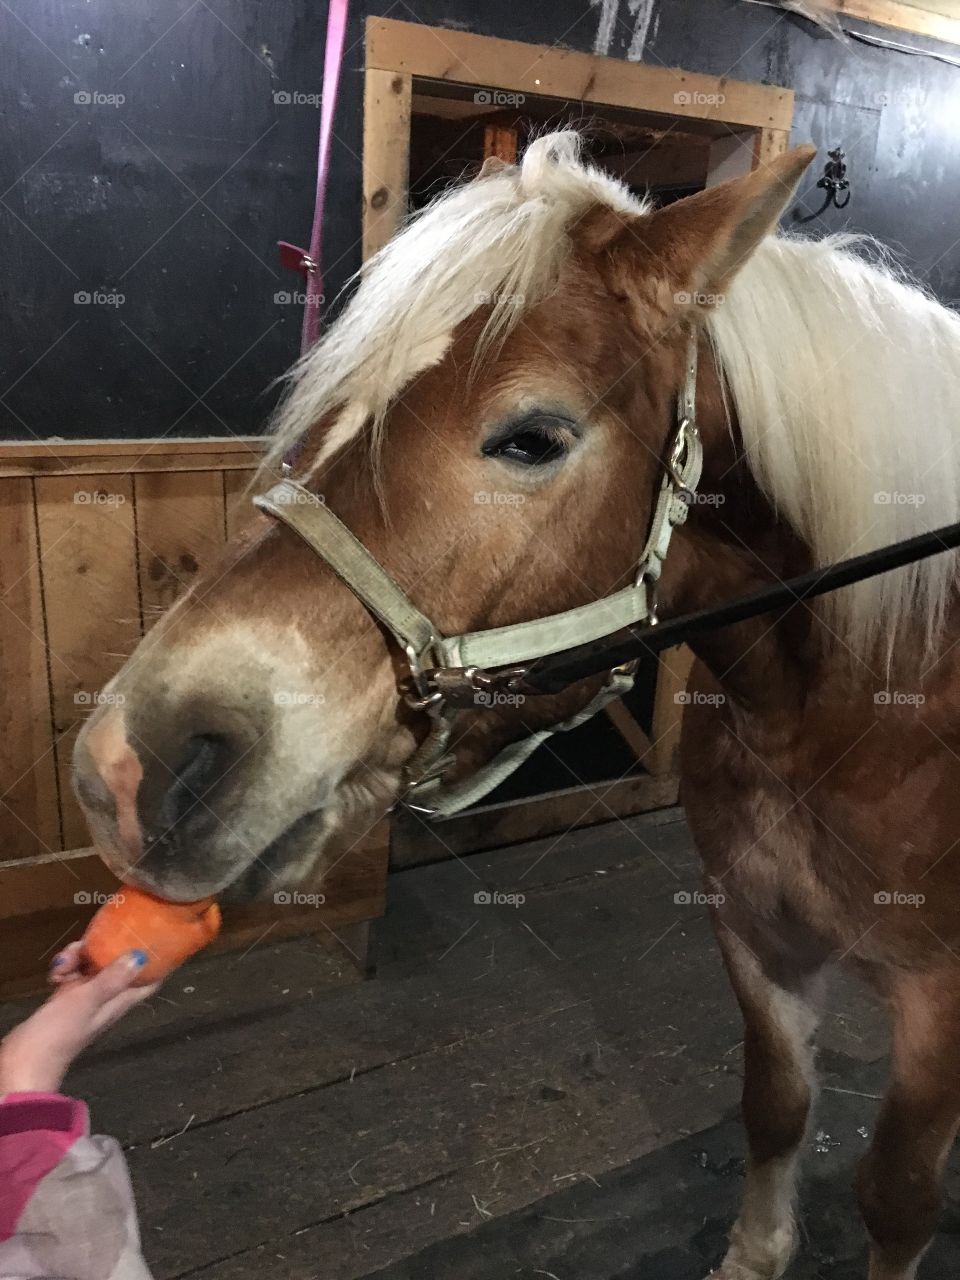 Horse eating a carrot